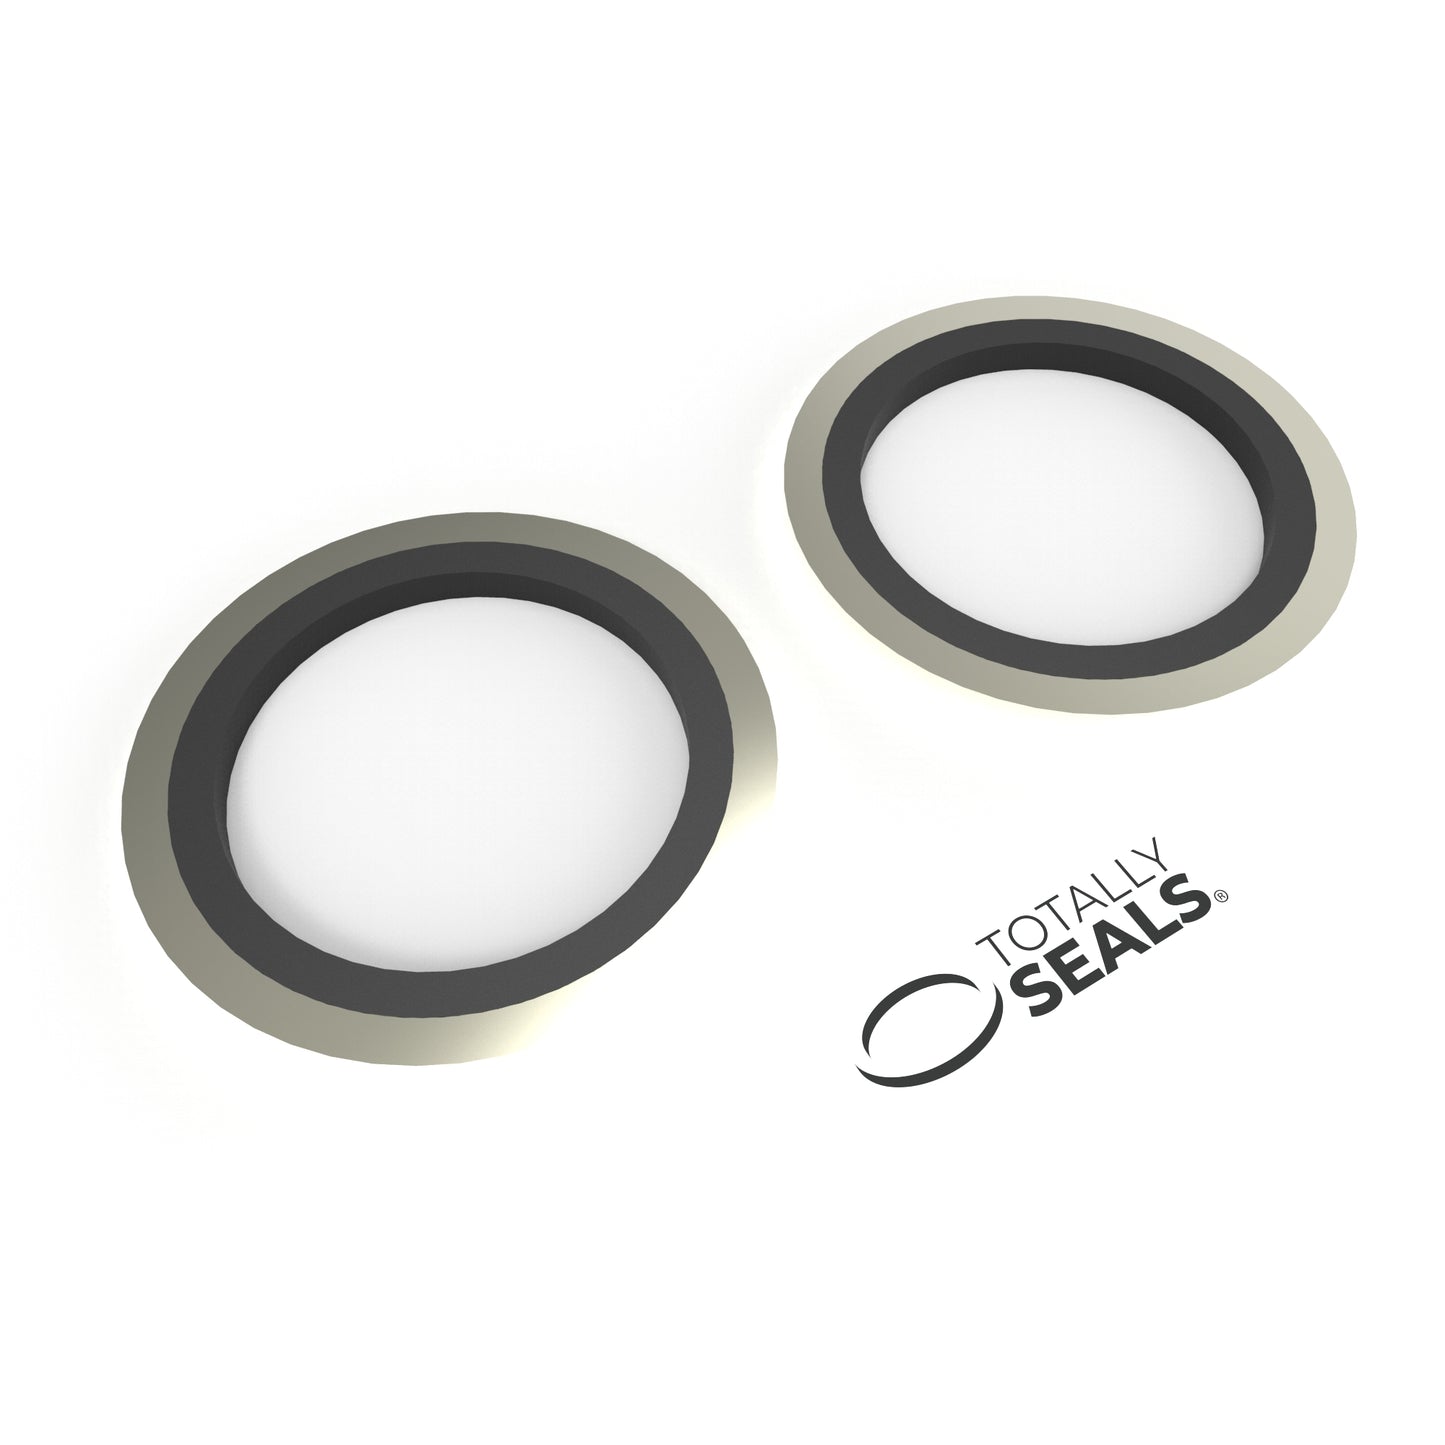 M10 Bonded Seals (Dowty Washers) - Totally Seals®